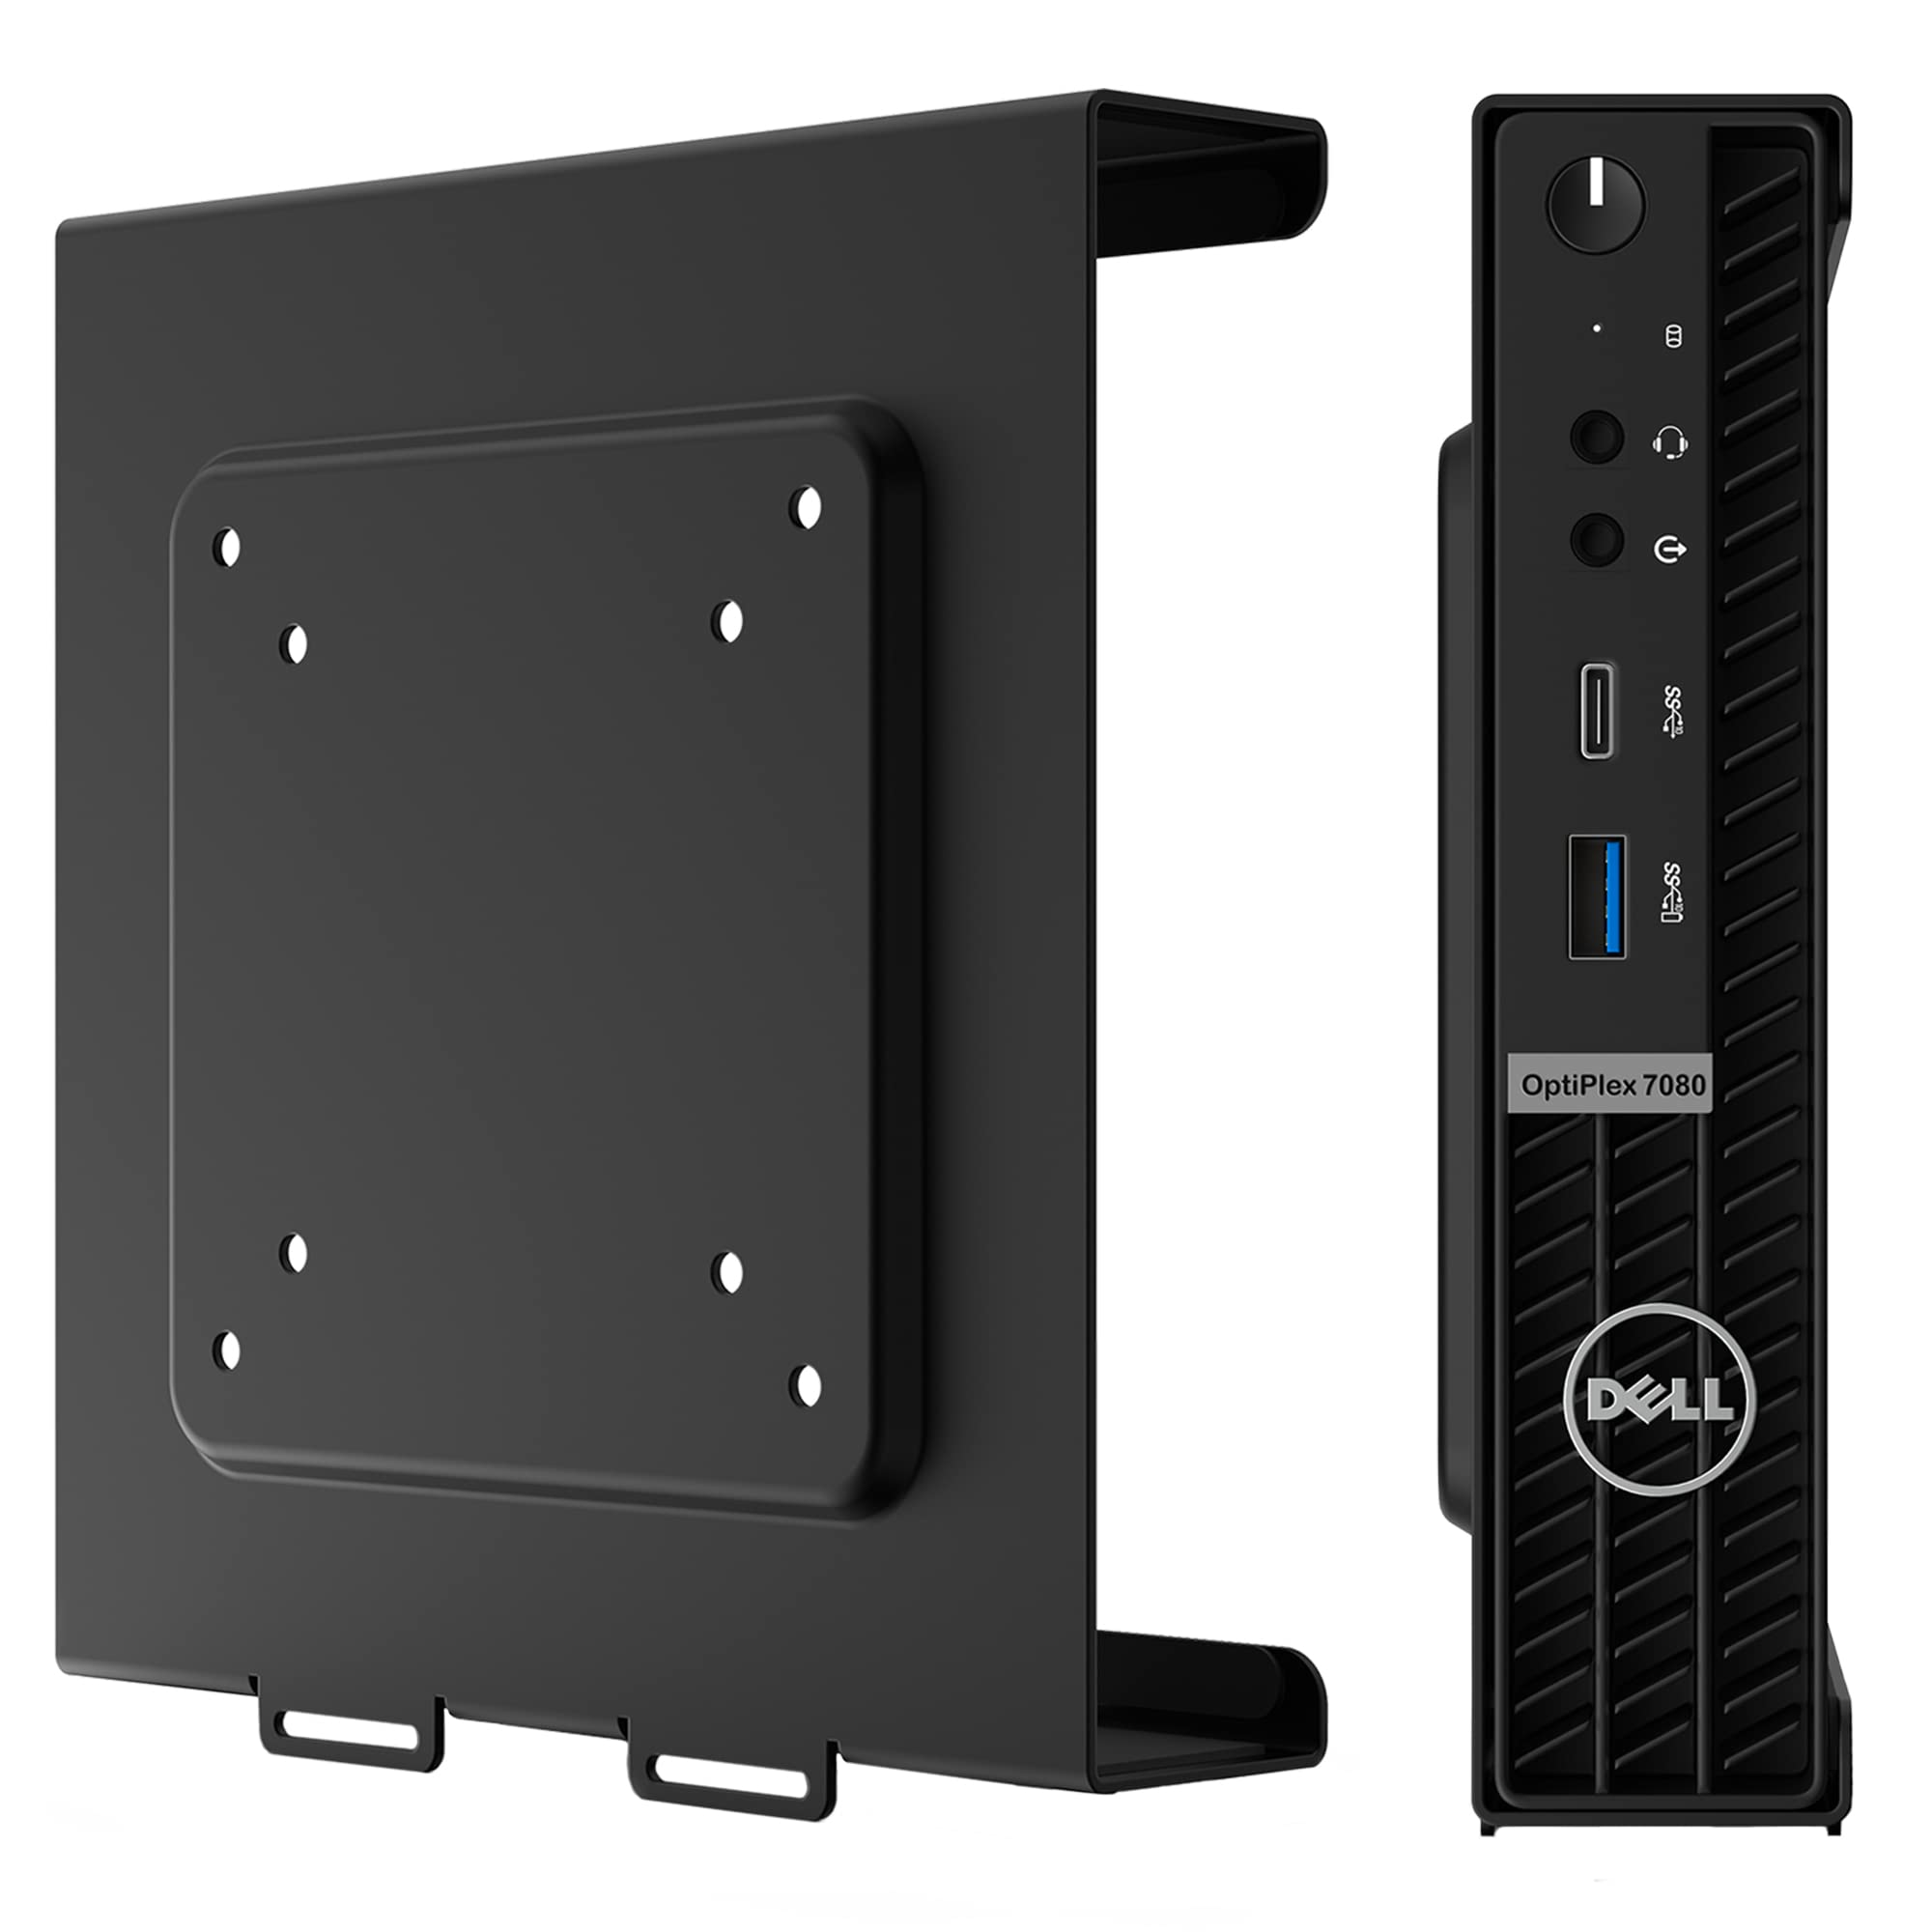 dell-s-optiplex-7090-tower-stands-tall-alongside-small-form-factor-and